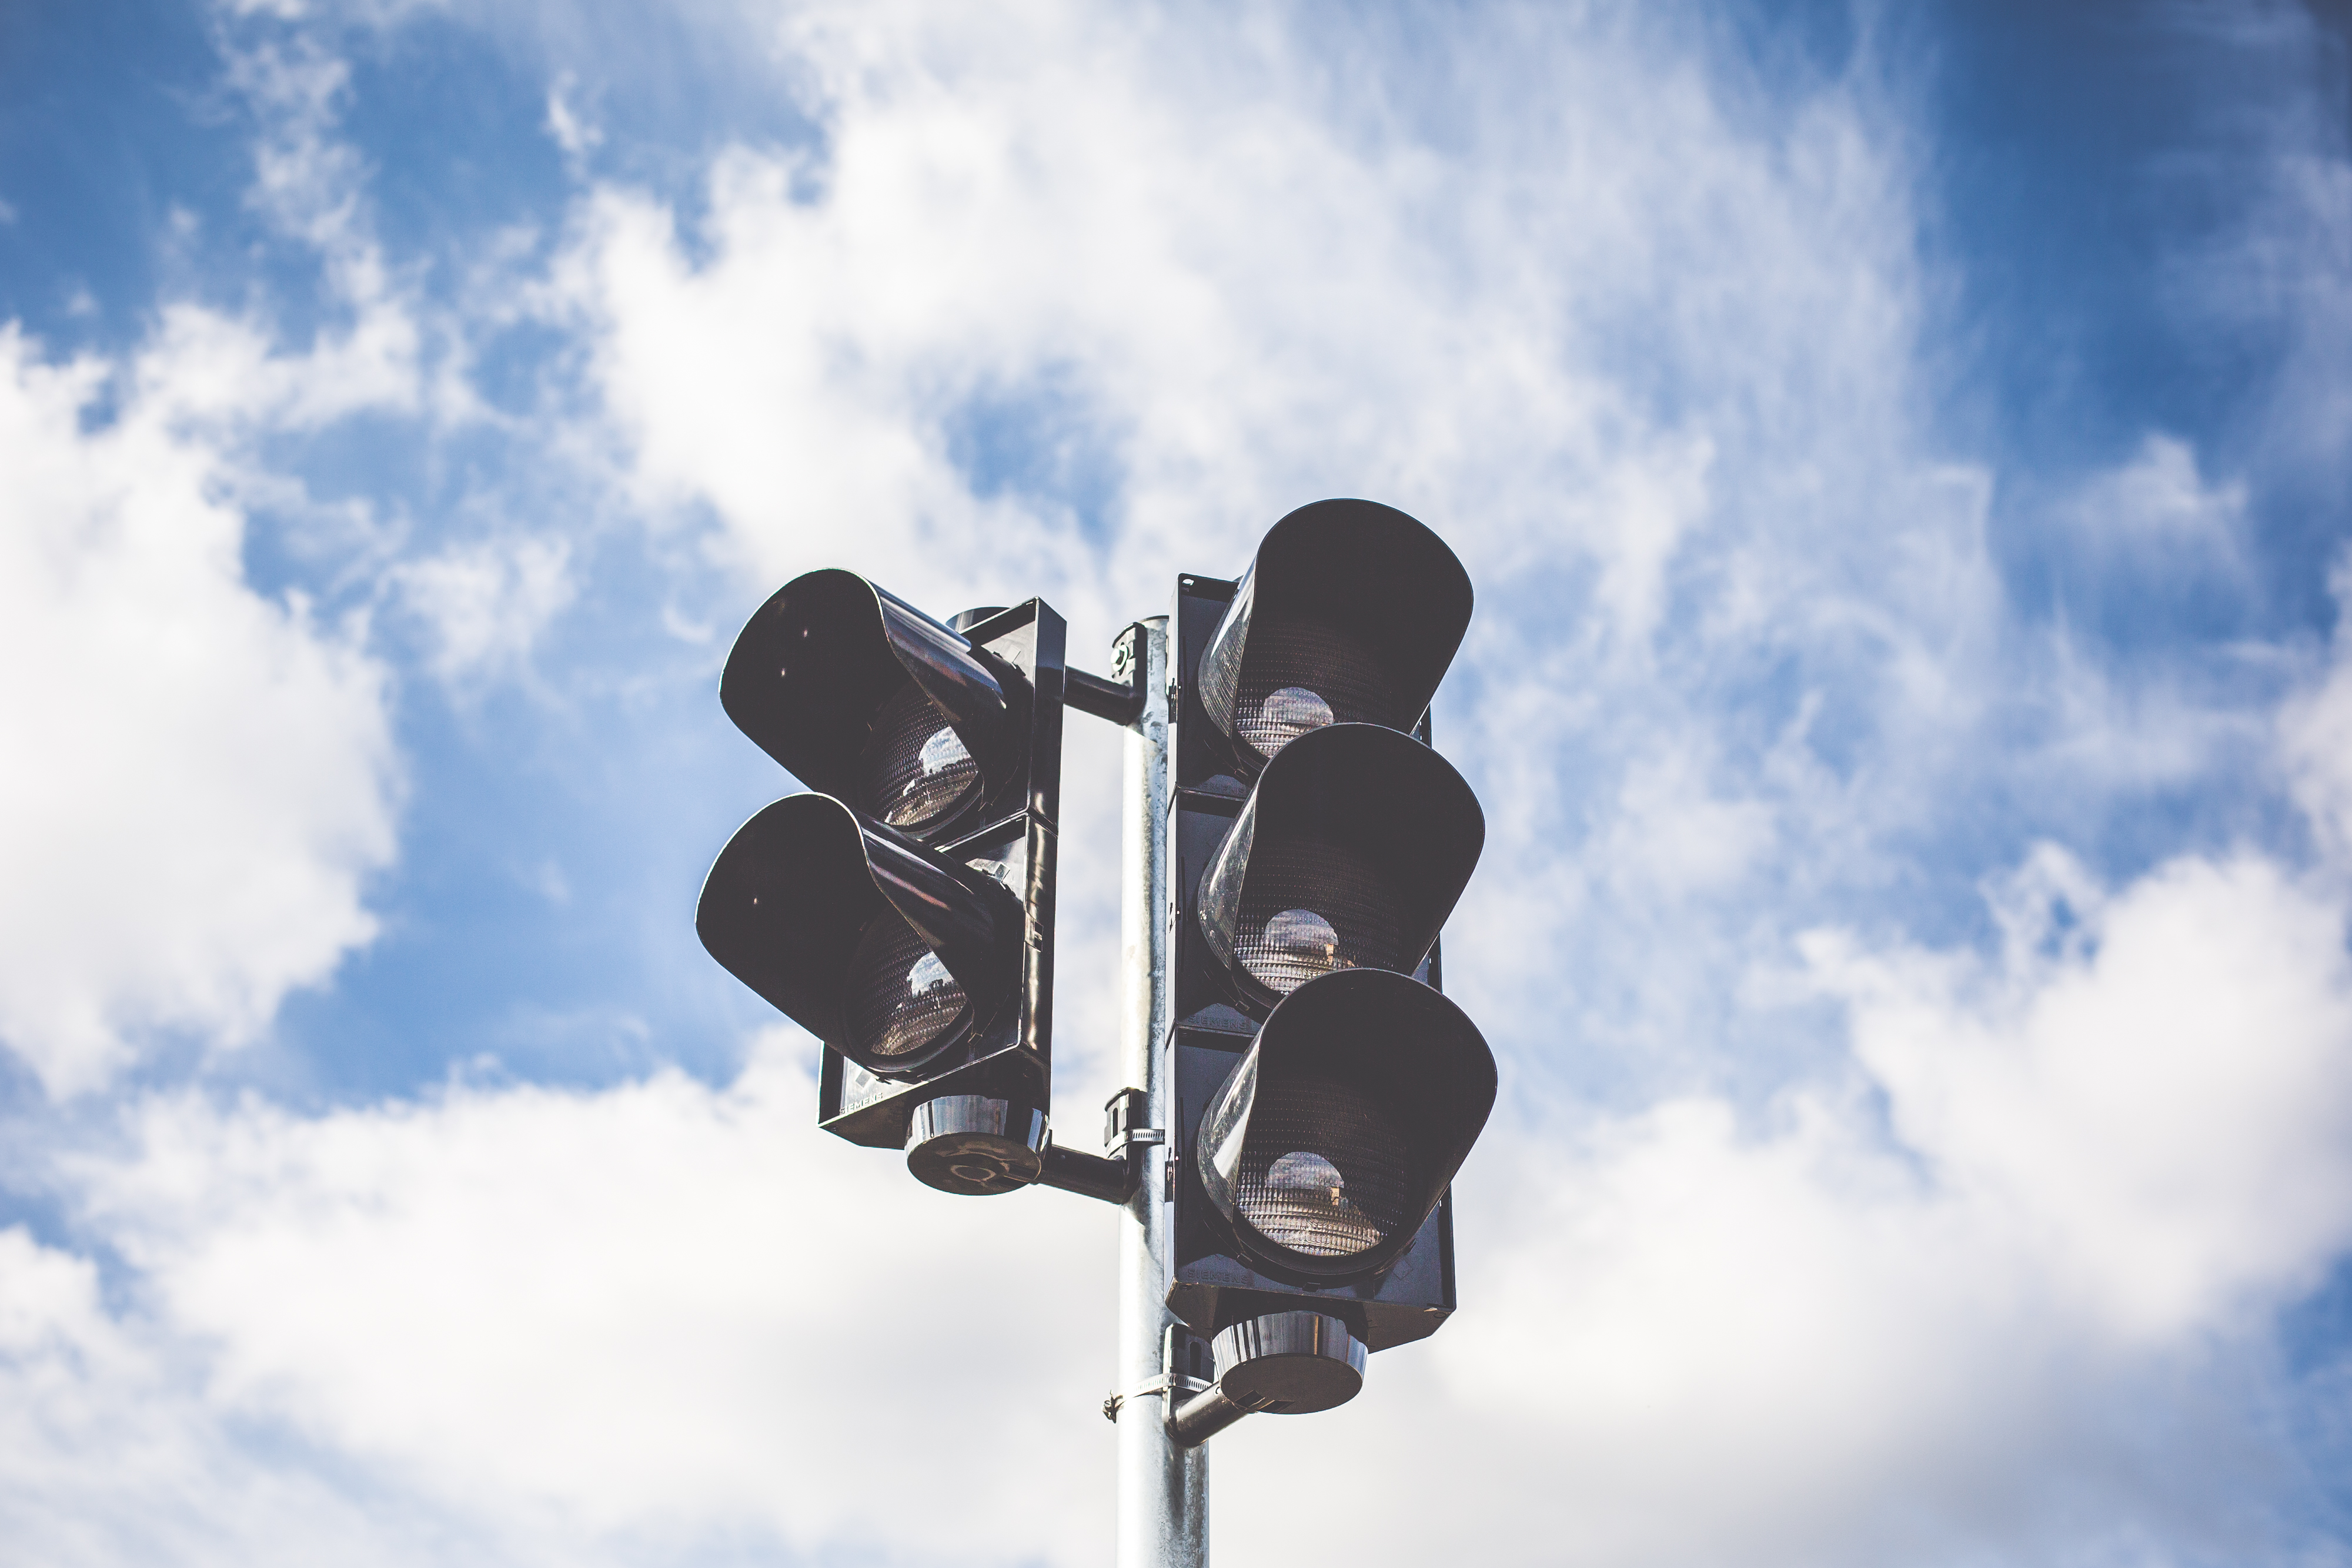 traffic-lights-and-sky-with-clouds-picjumbo-com (1)